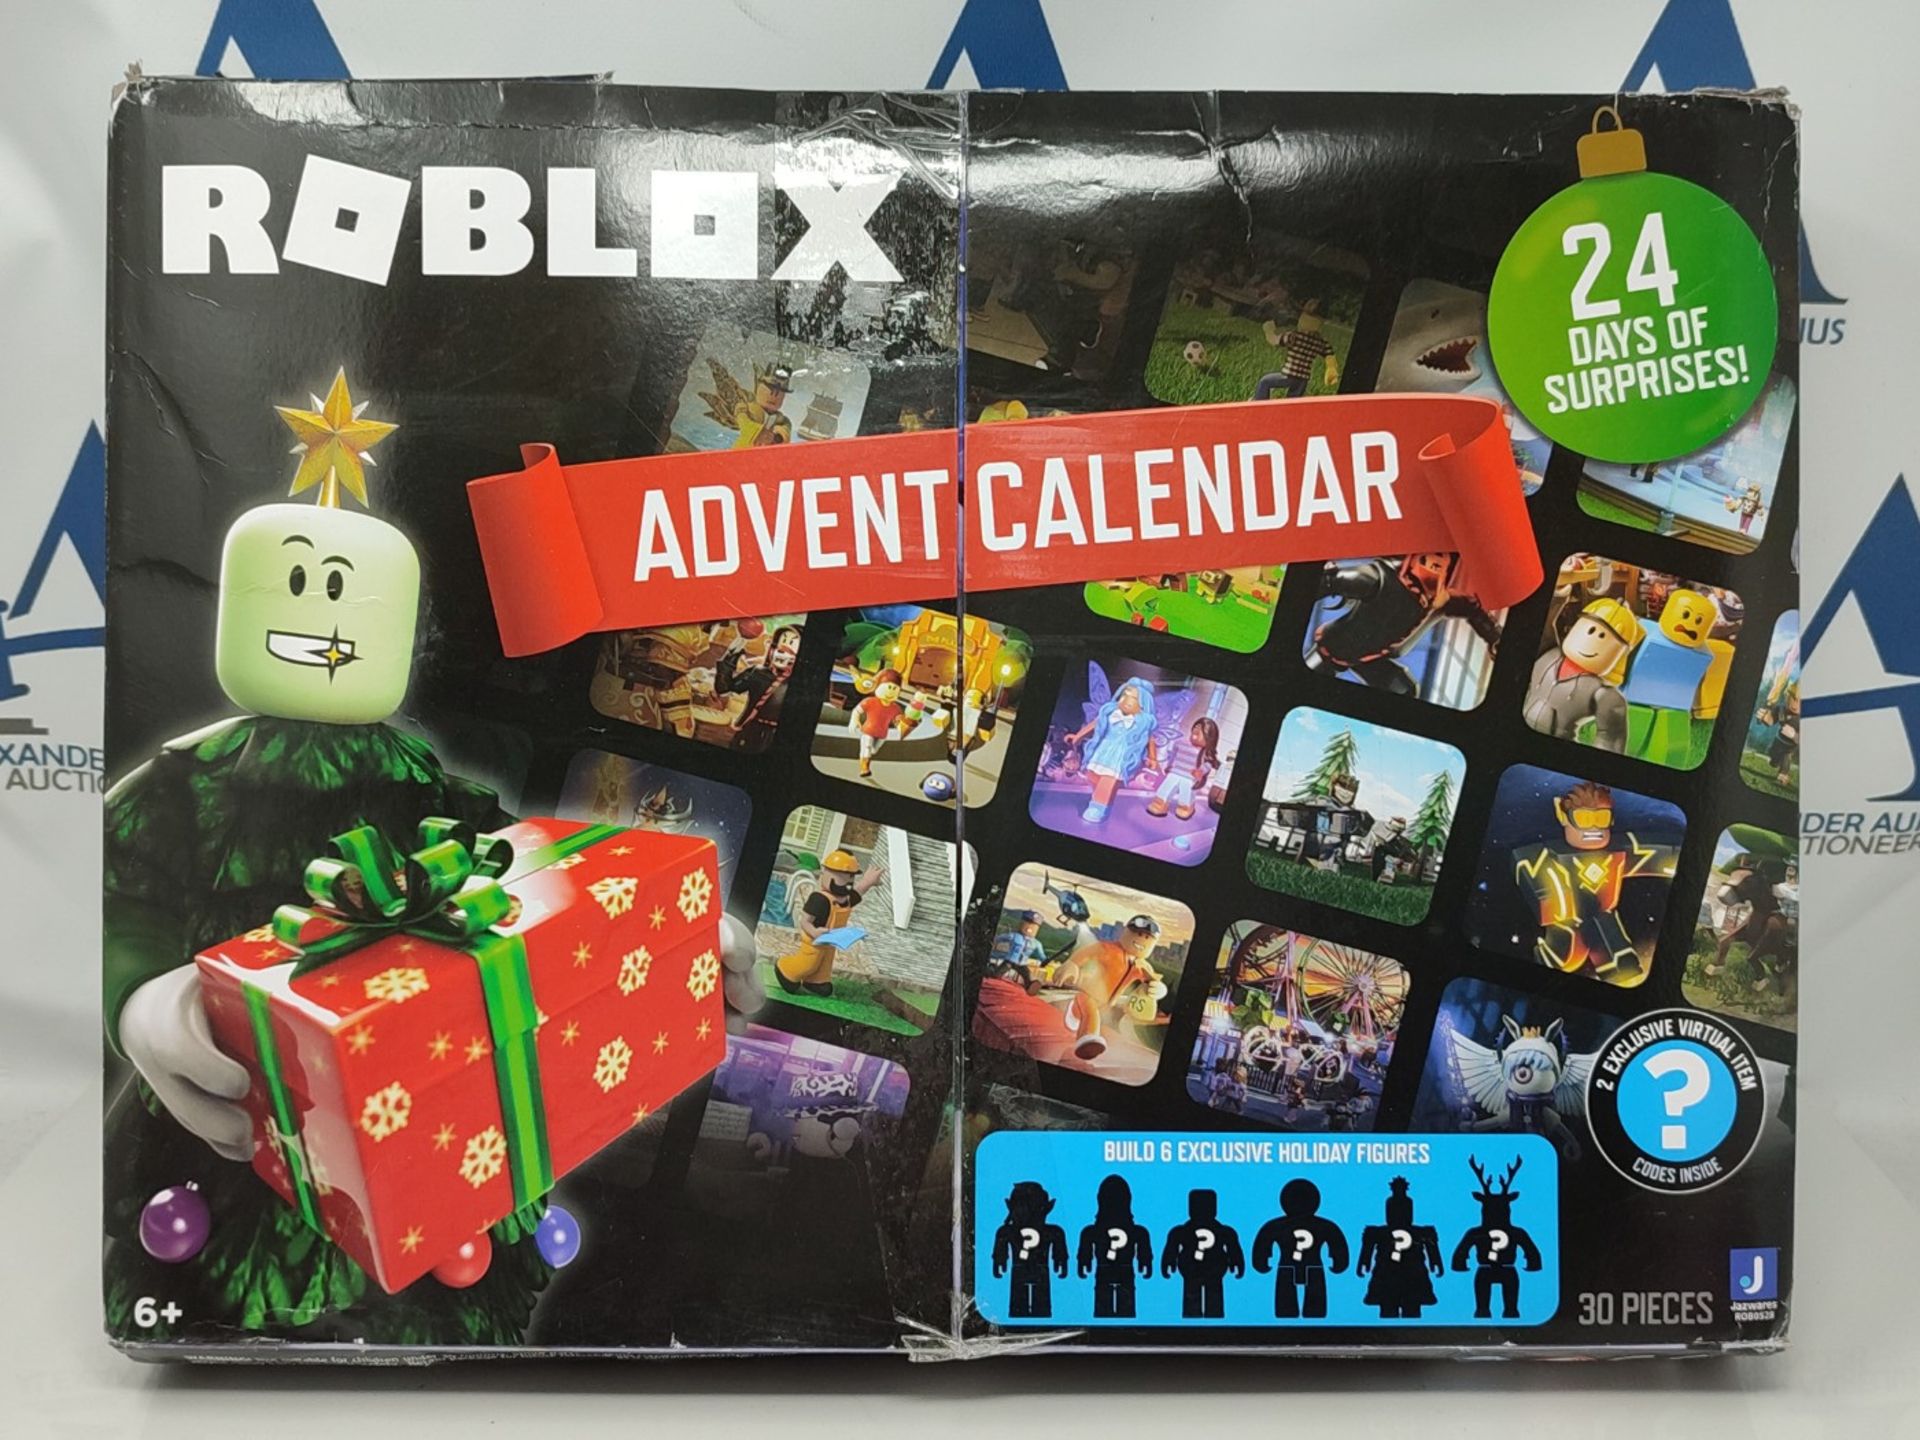 Roblox ROB0537 Advent Calendar ([Includes an exclusive virtual item]) - Image 2 of 2